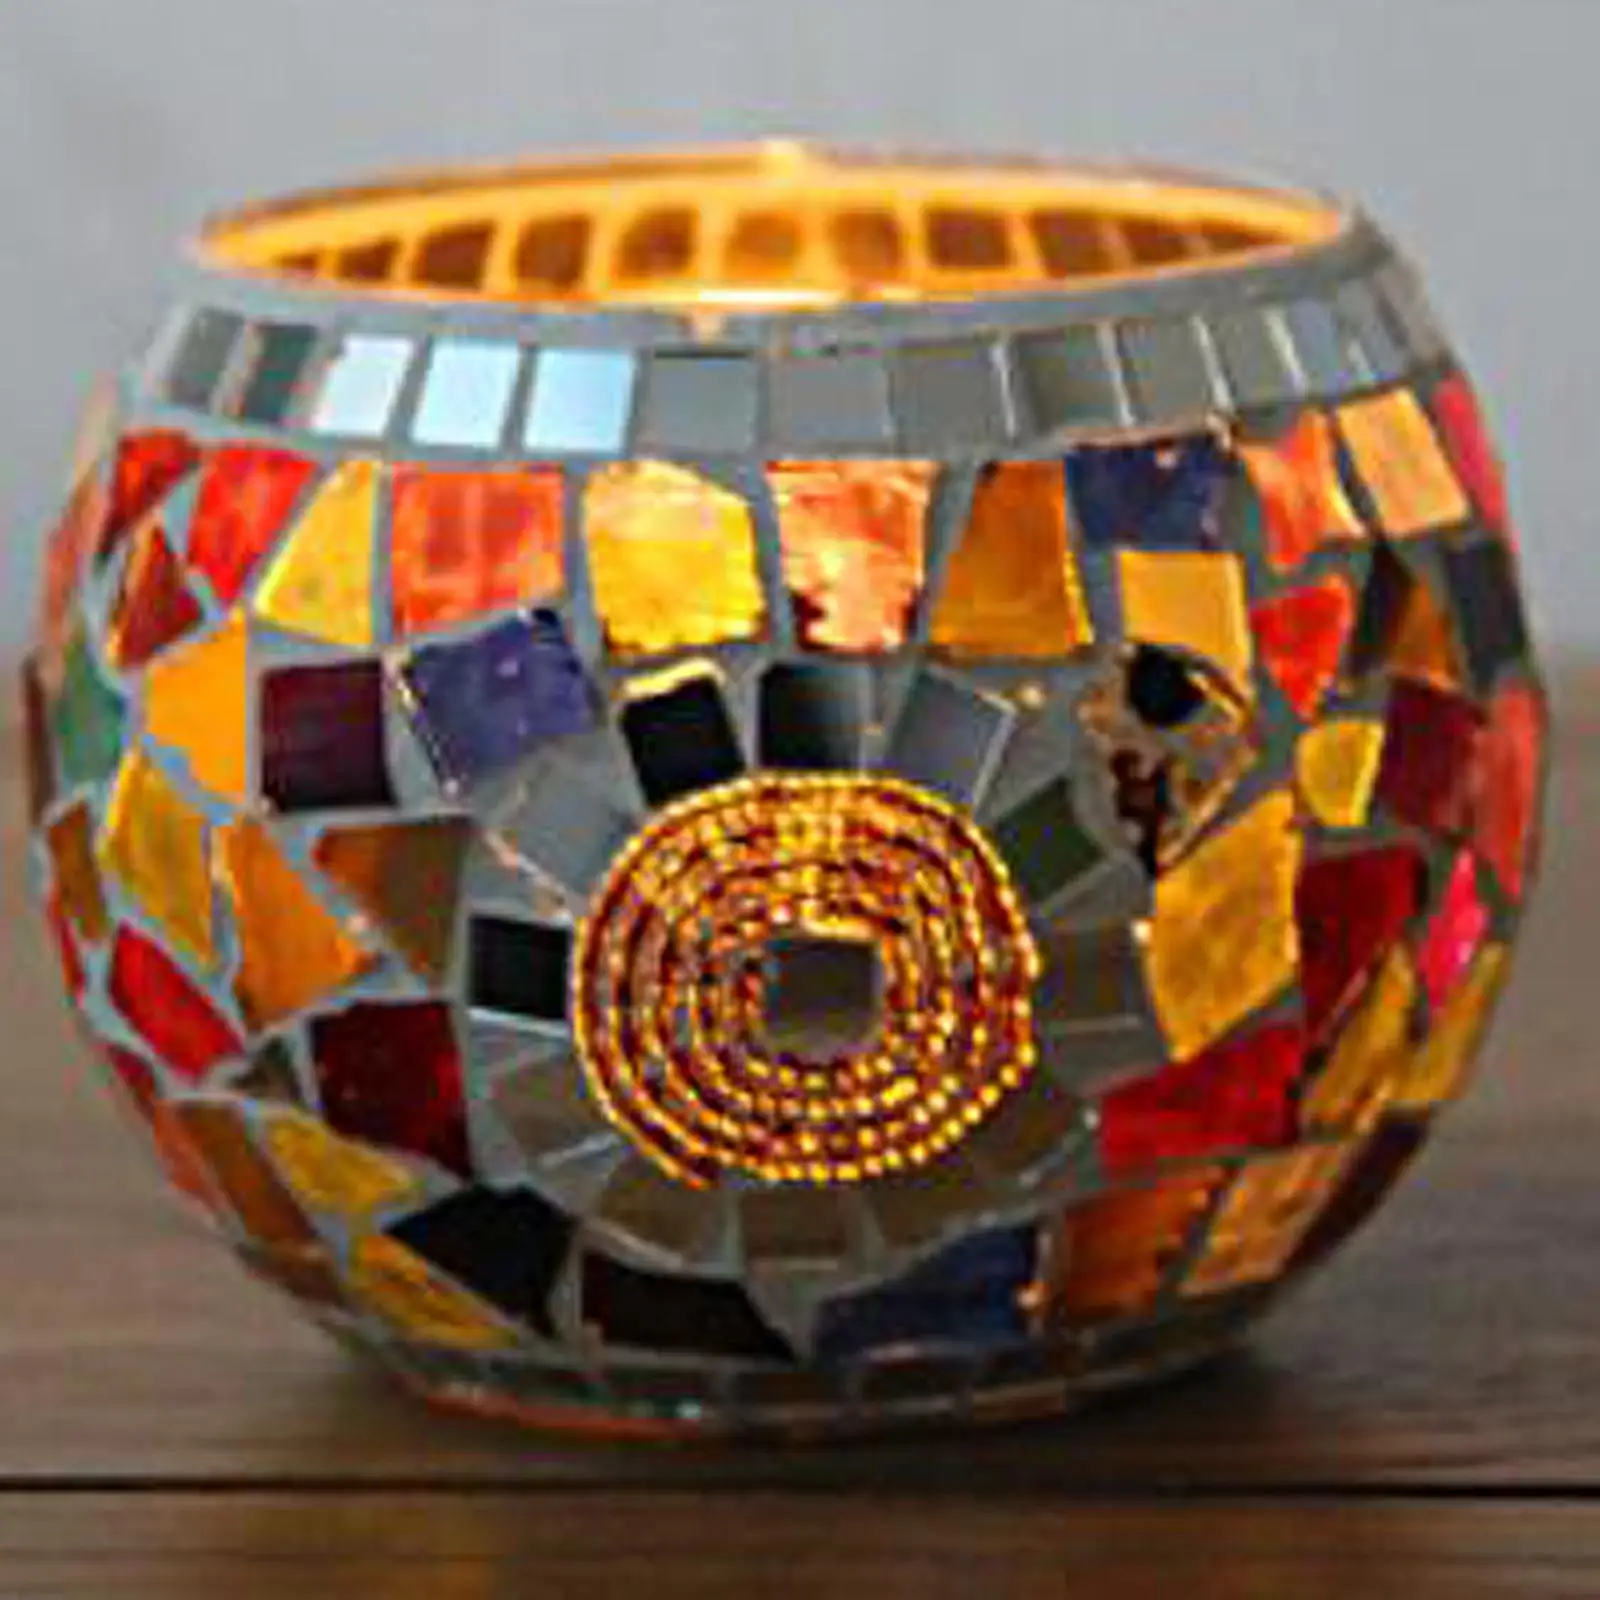 Mosaic Glass Candle , Tea Light  Handmade Artwork Gifts for Living Room Bedroom Decor Party Decorations